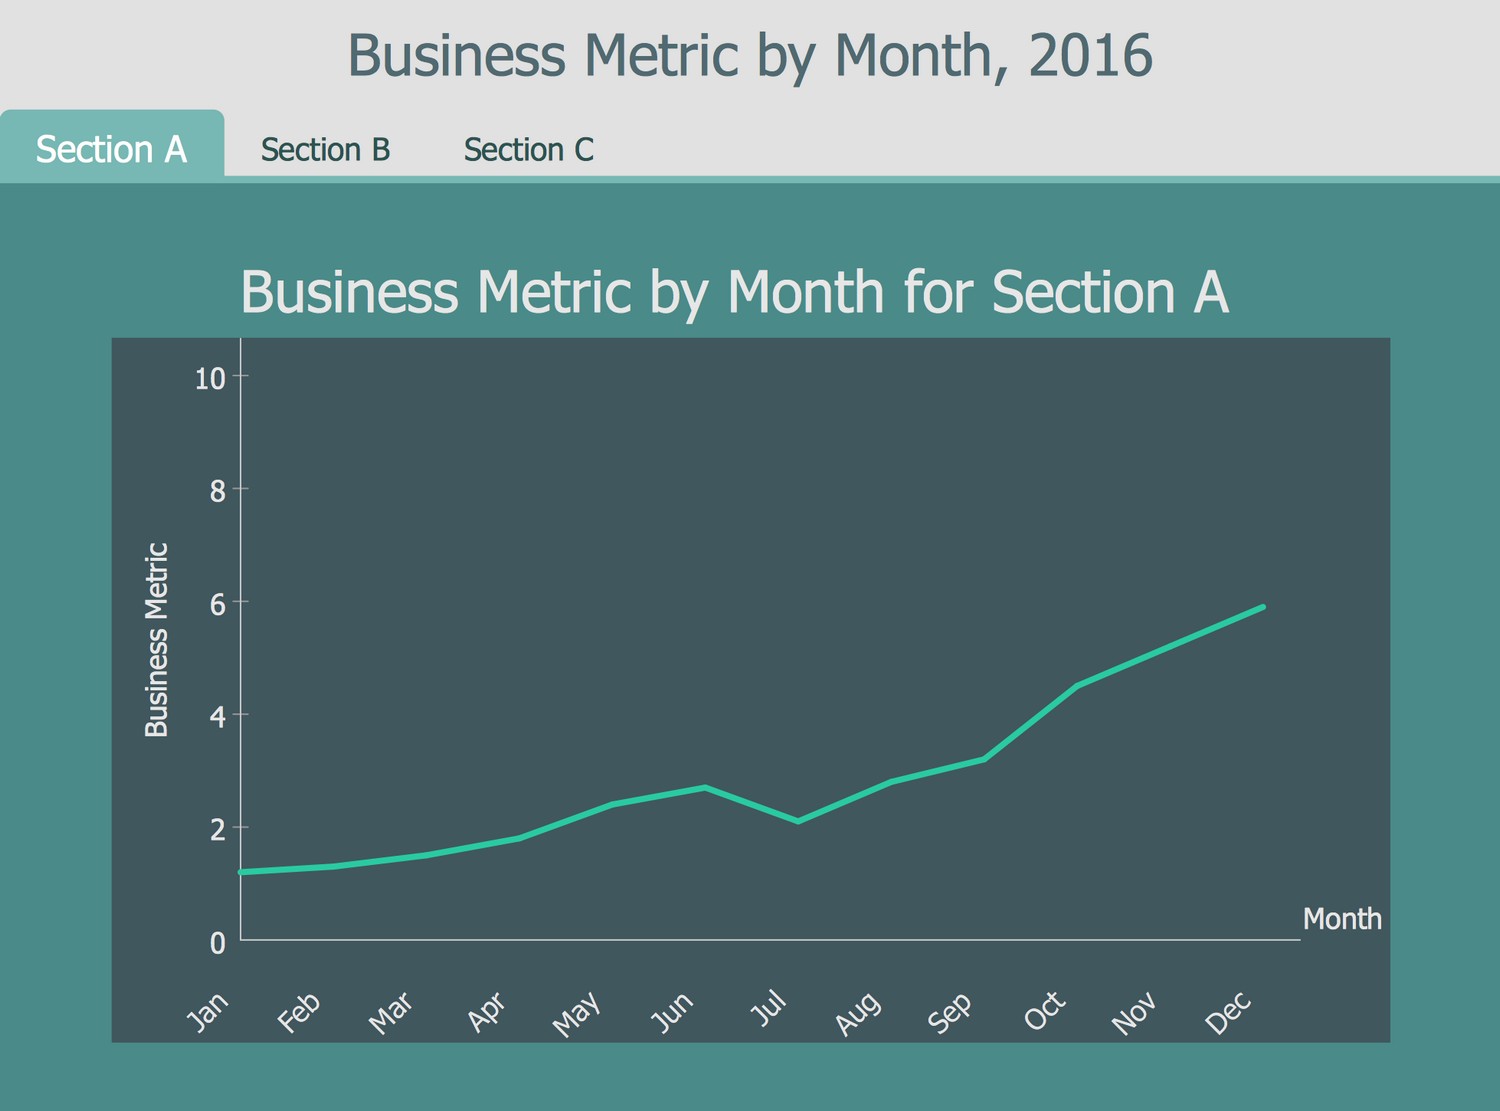 Business Intelligence Dashboard Template - Business Metric by Month, 2016 for 3 Sections